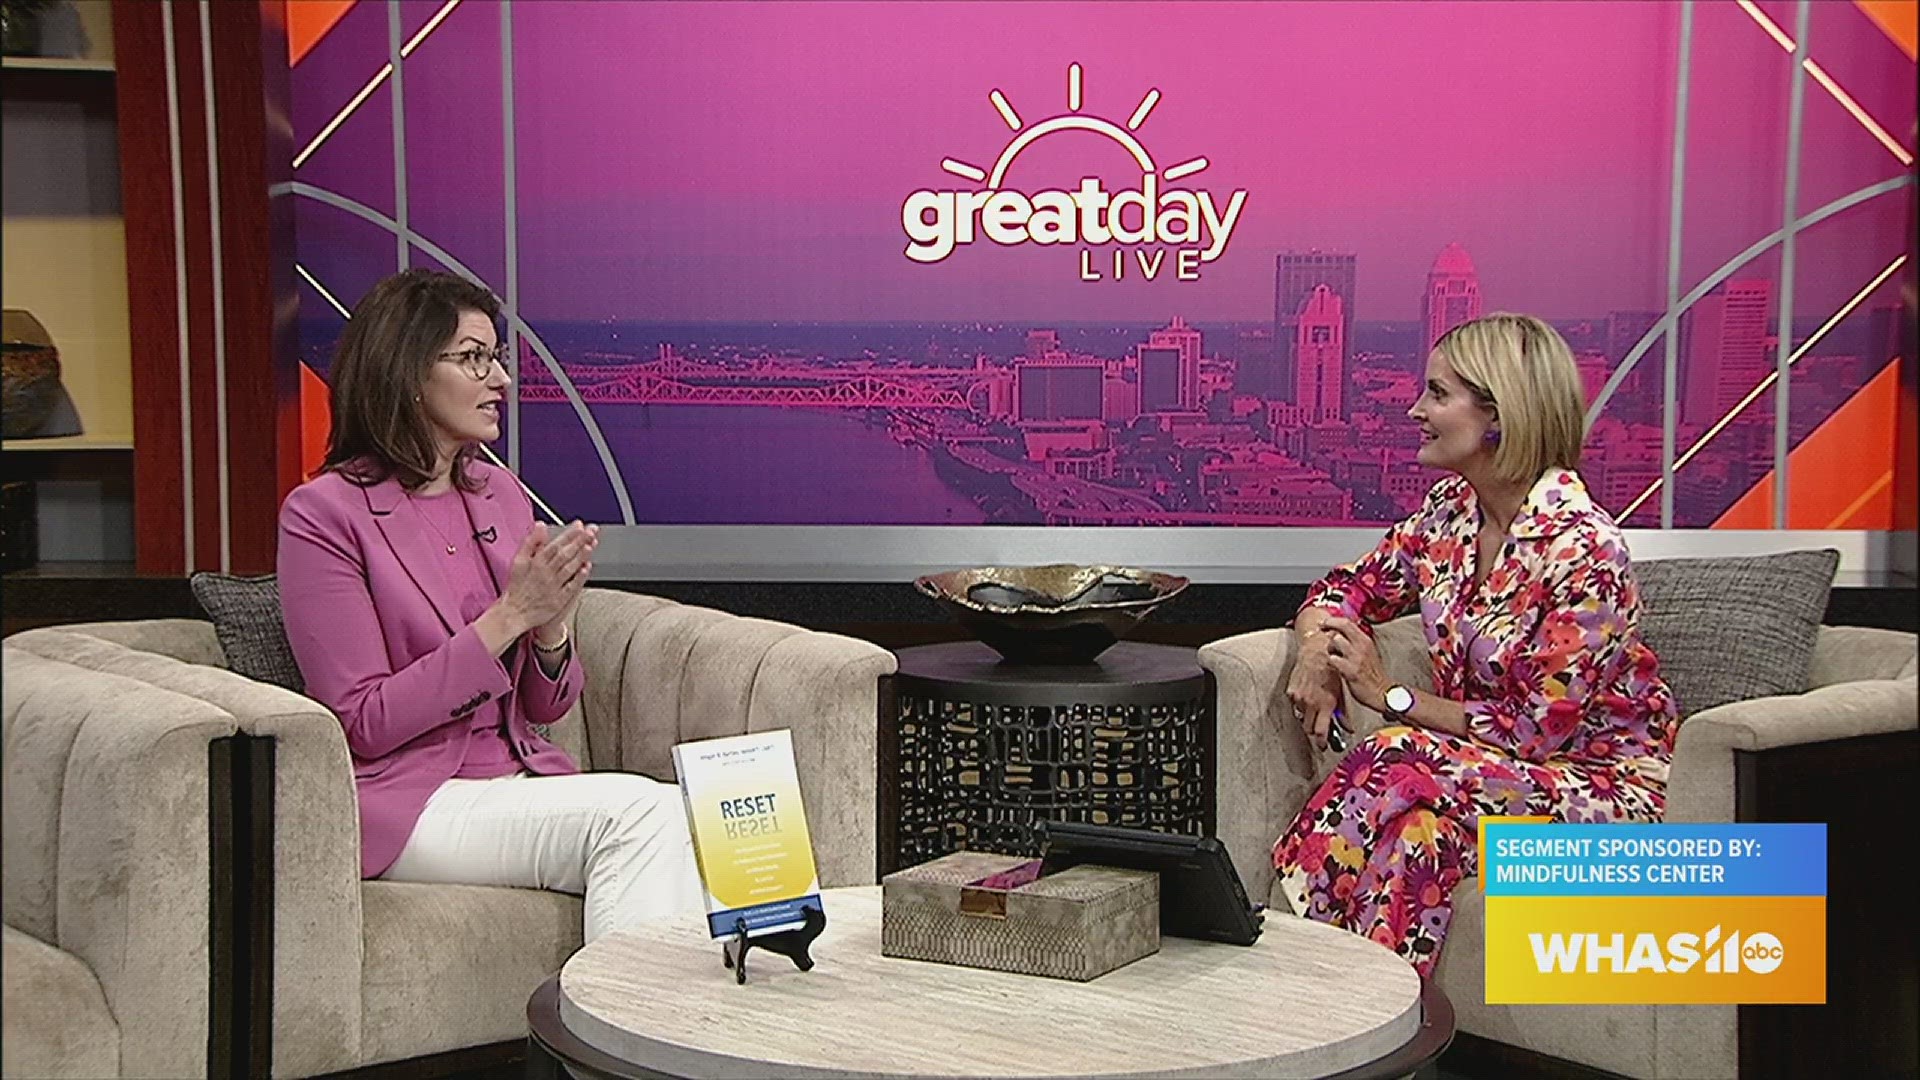 The Mindfulness Center on Great Day Live!